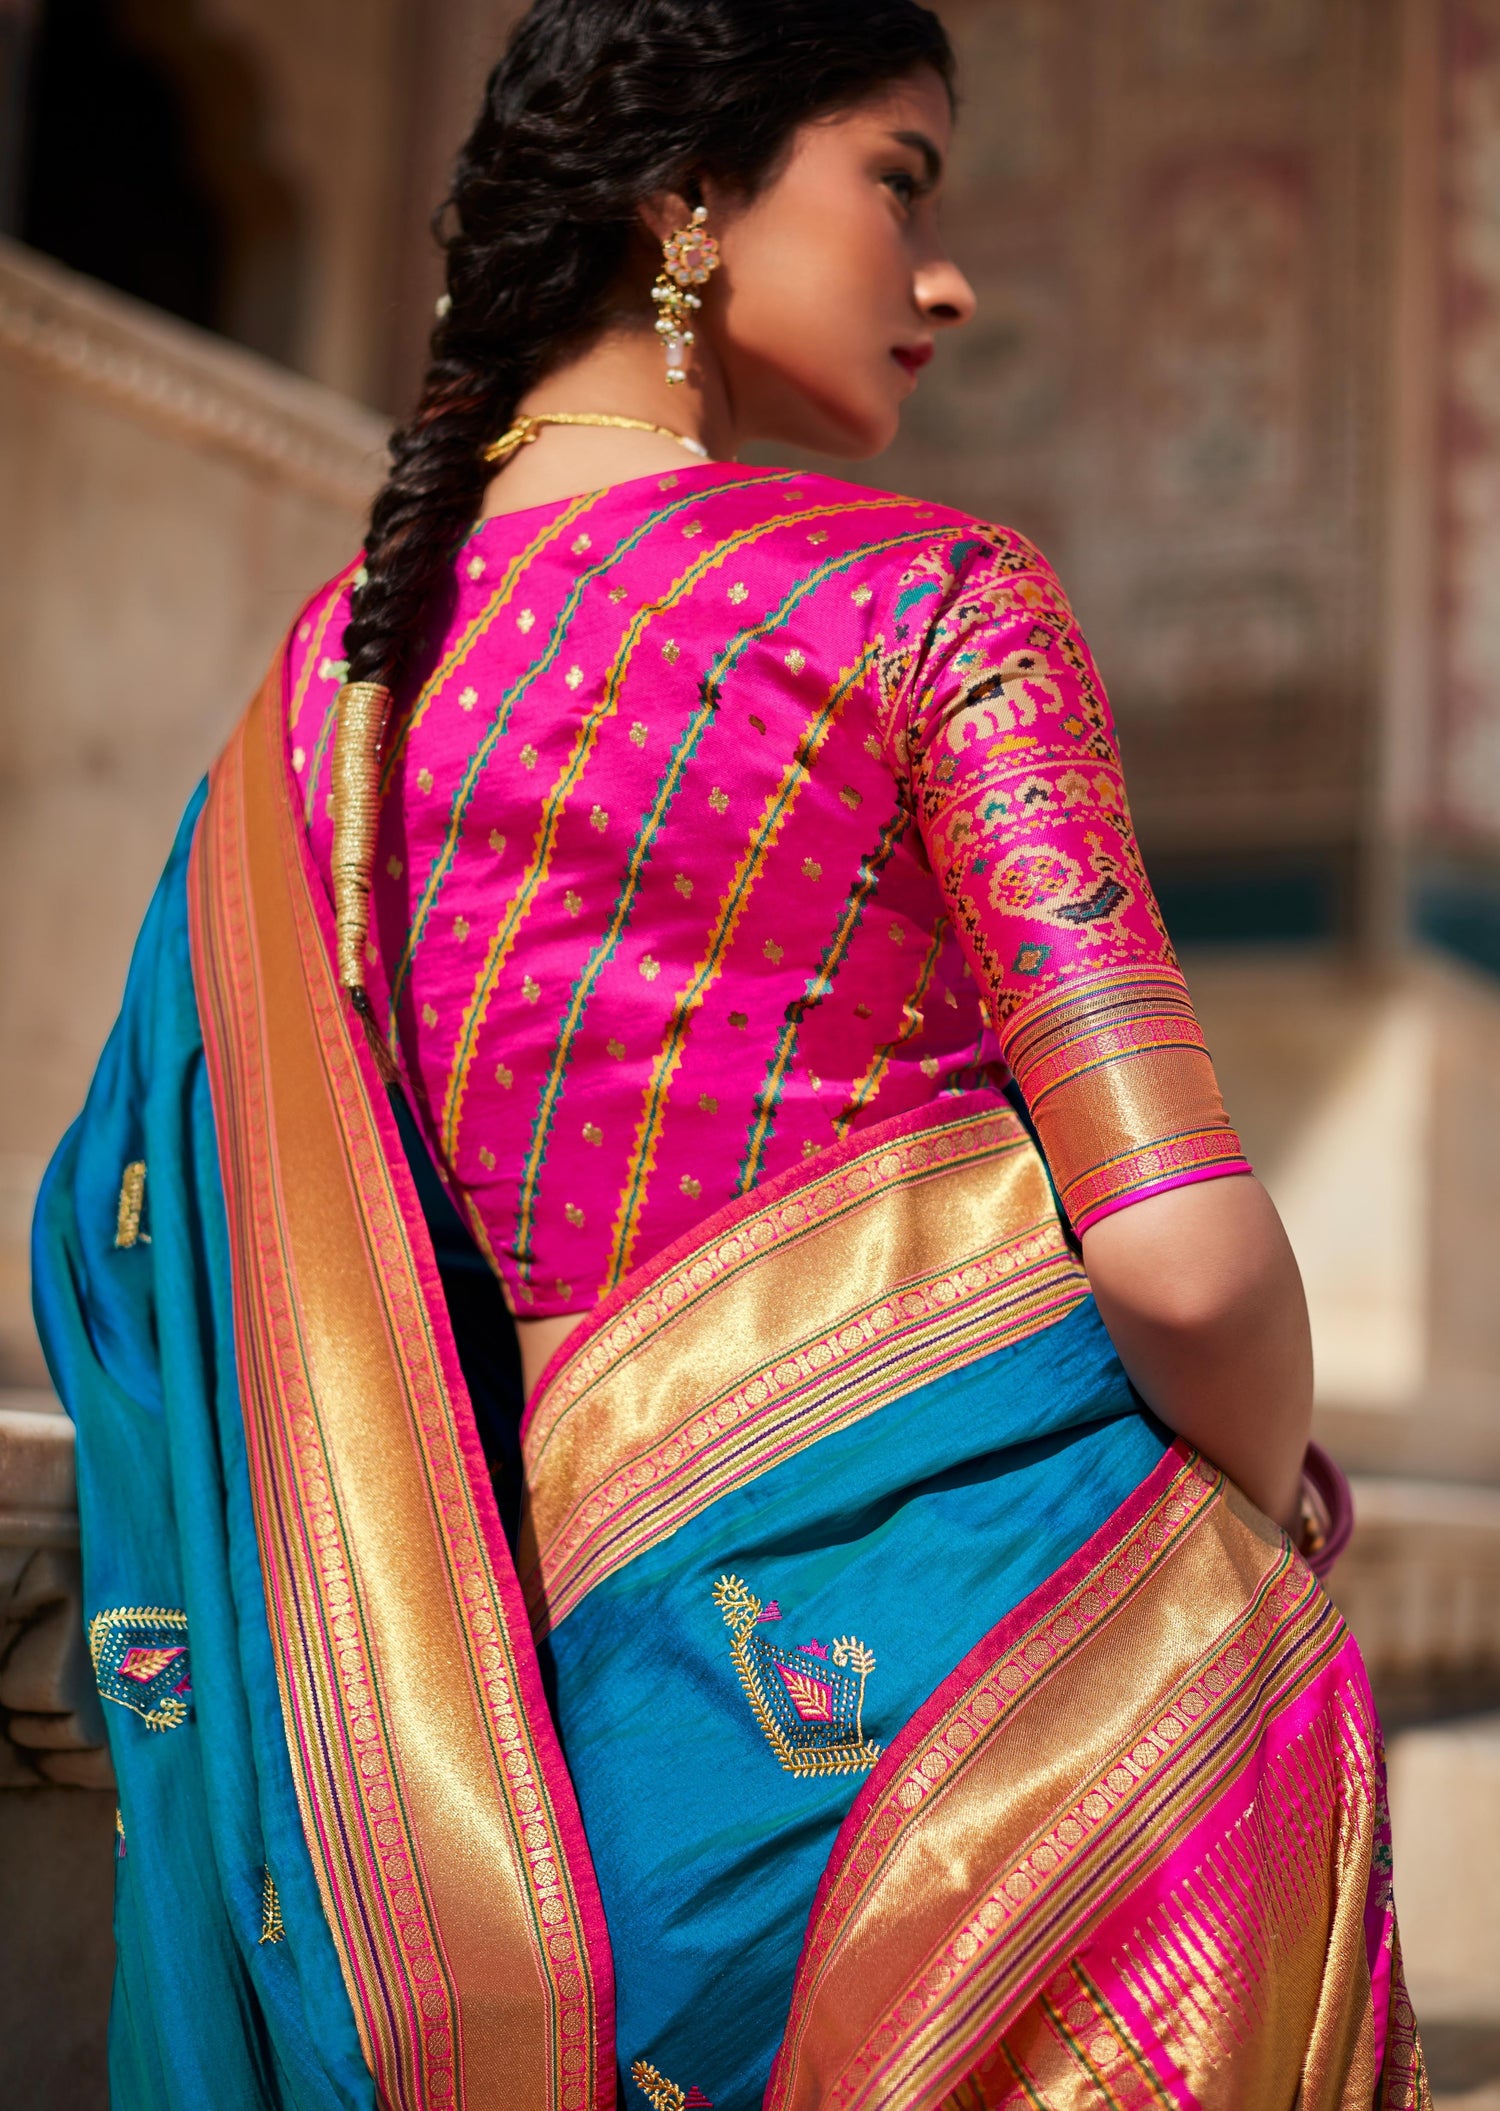 8 Types Of Banarasi Sarees For Every Occasion | LBB